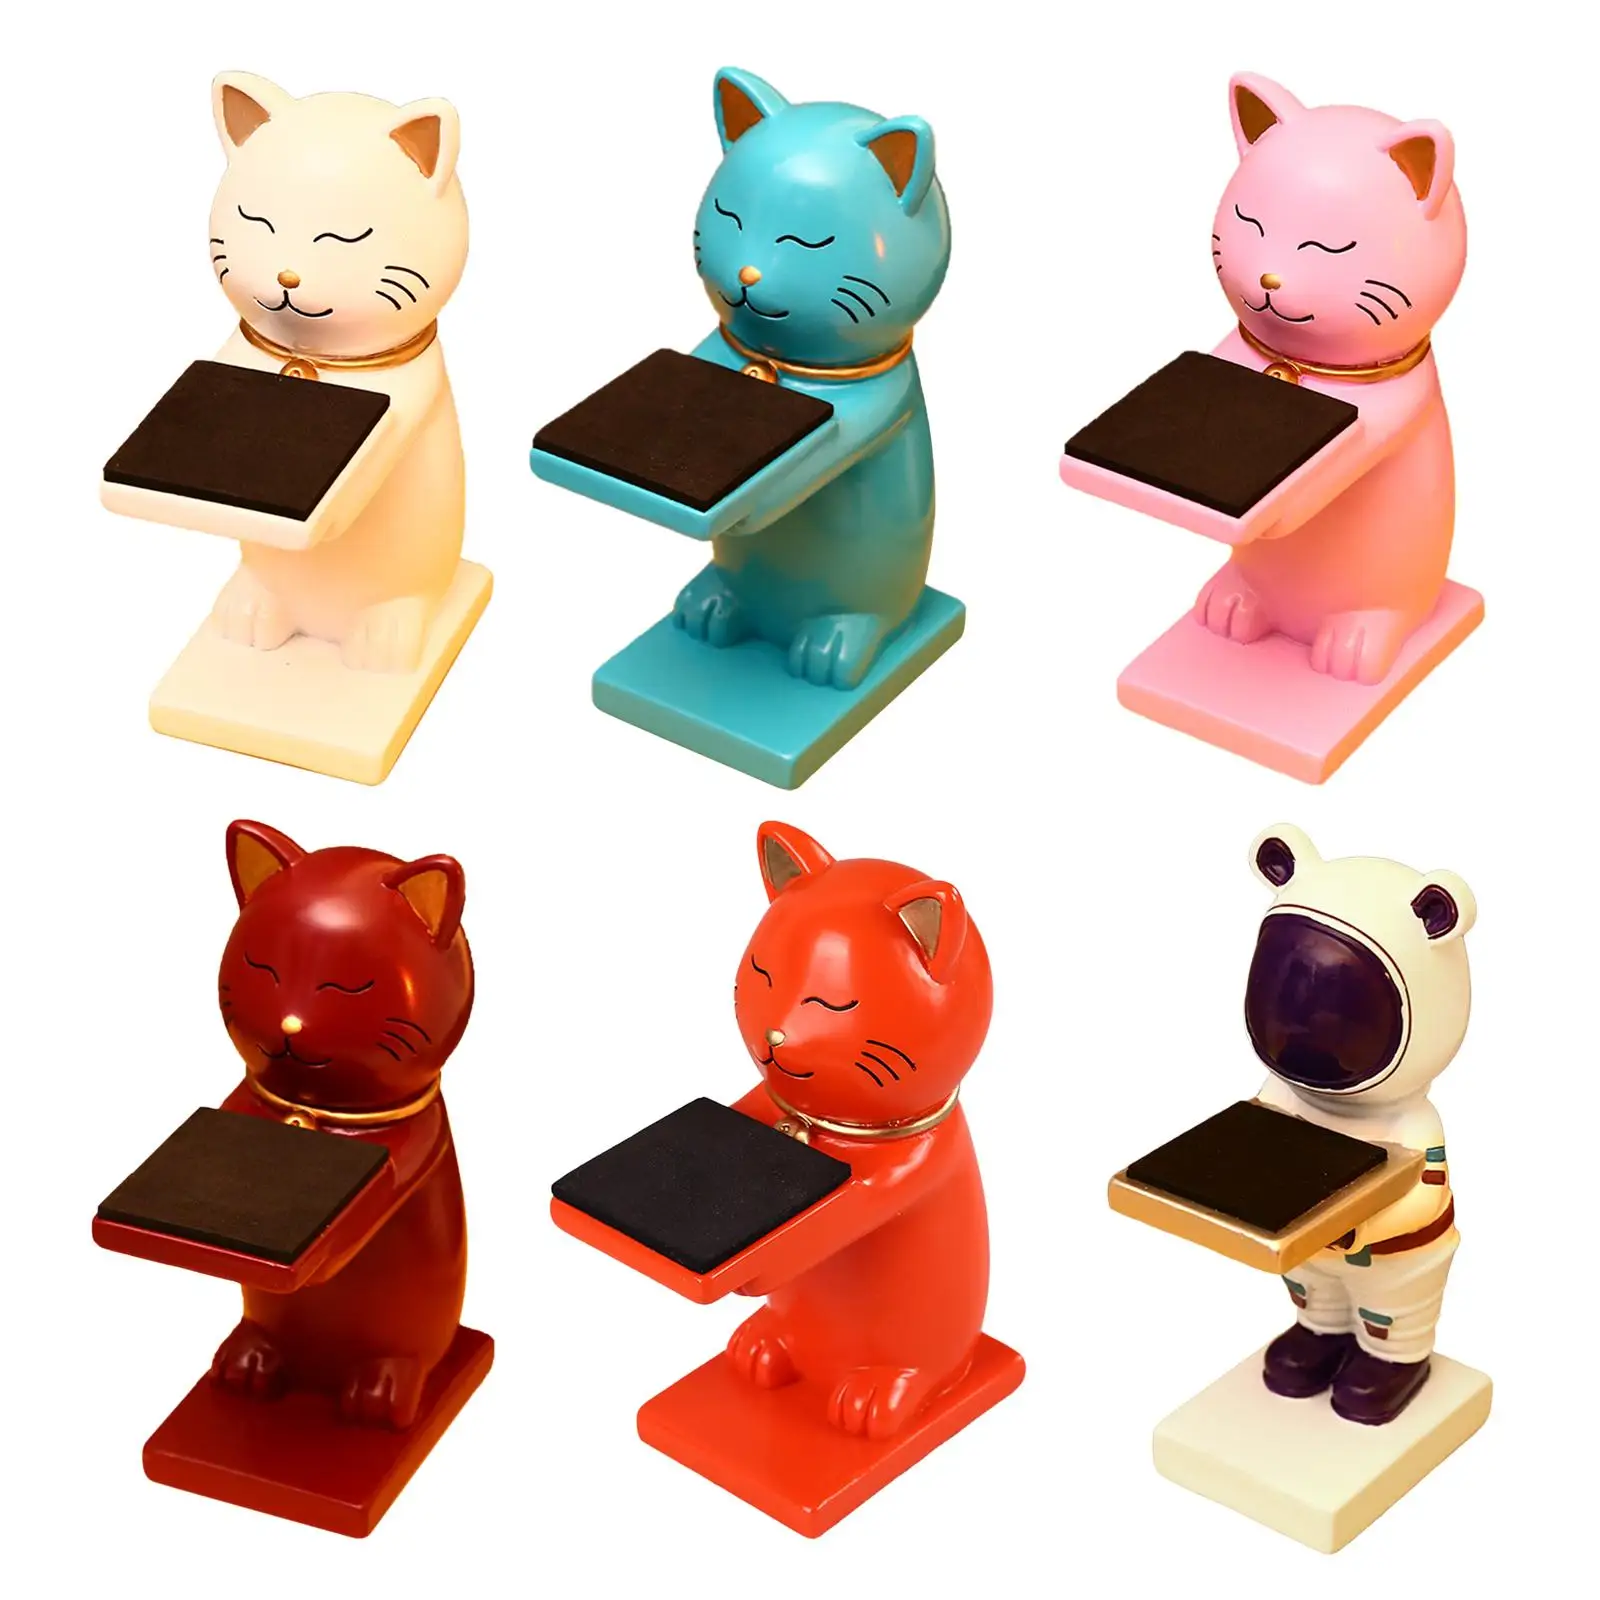 Resin watch Holder Storage Rack Tray ring Display for Watch Necklace Home office Decoration Showcase